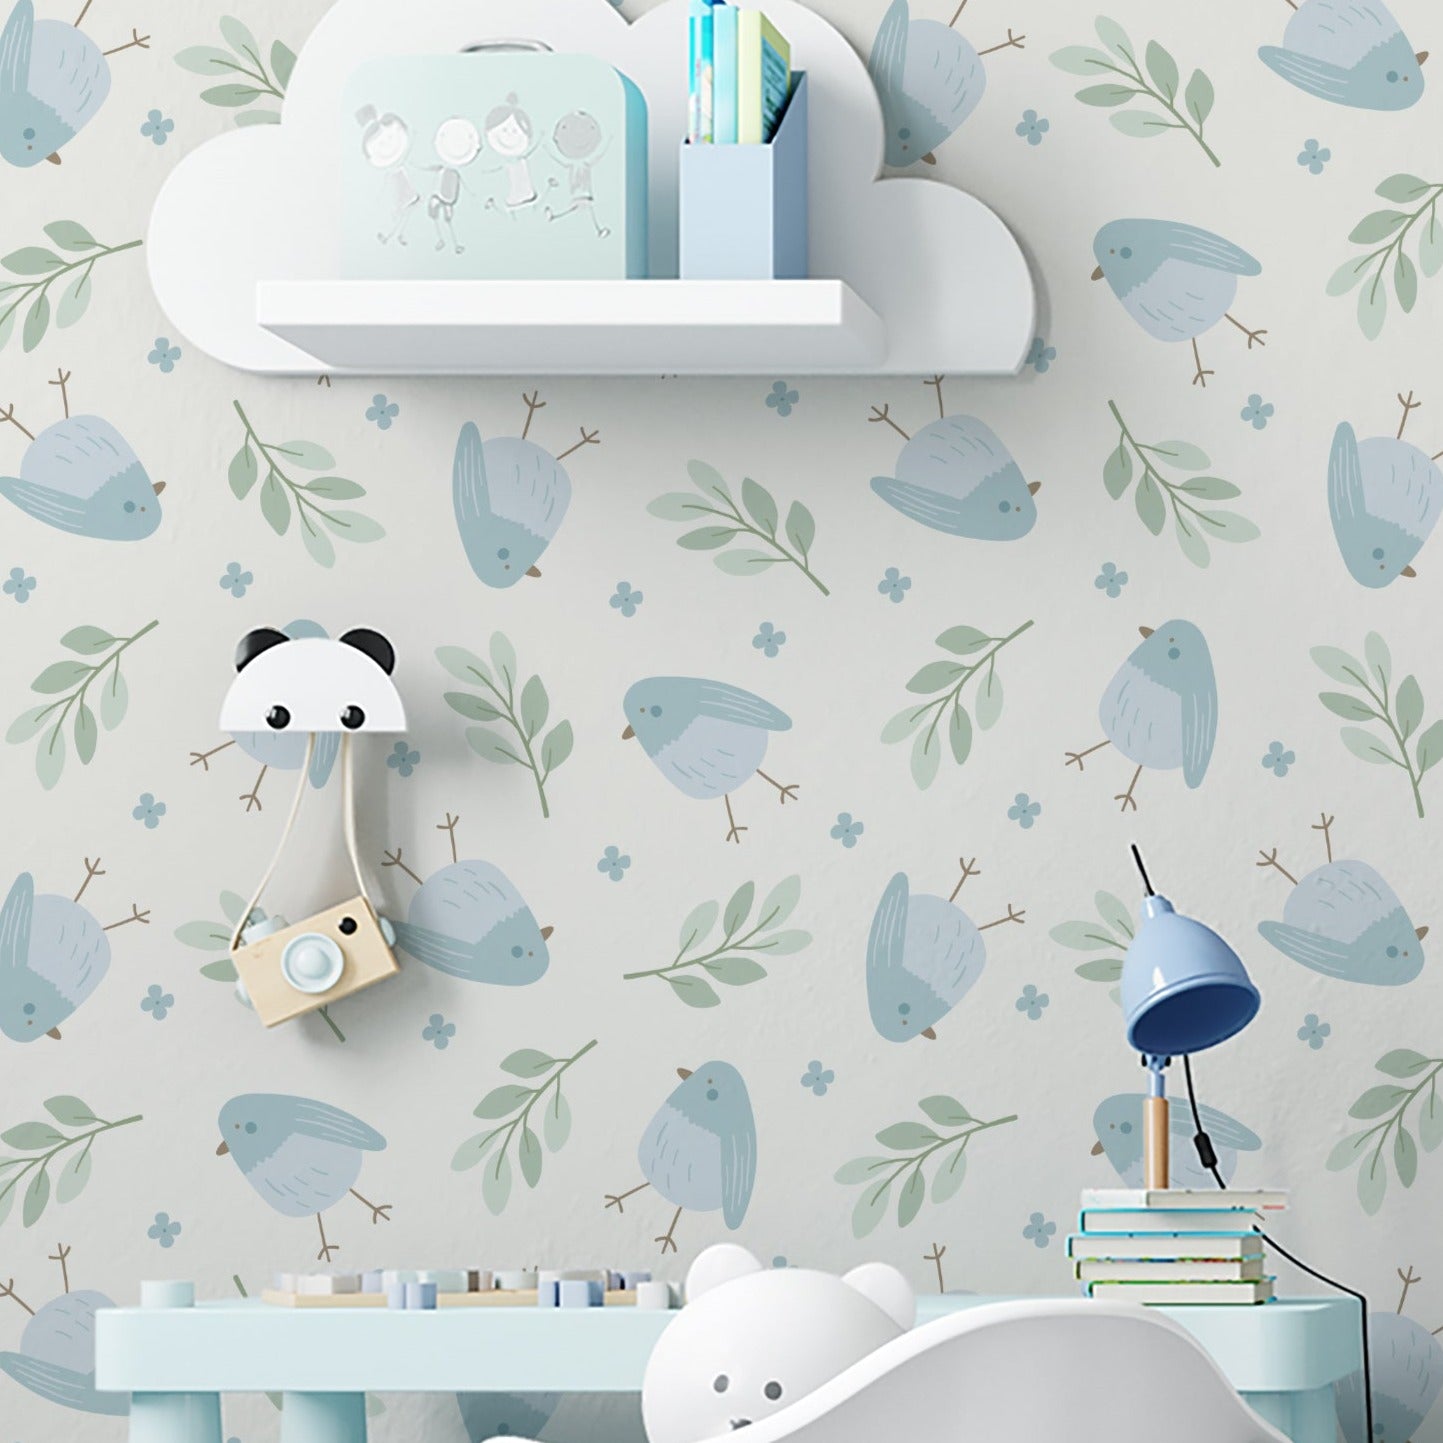 A delightful nursery room decorated with Baby Blue Bird Wallpaper, showcasing soft blue and green tones. The room features adorable children's furniture including a whimsical elephant chair and a panda lamp, creating a playful and soothing environment.